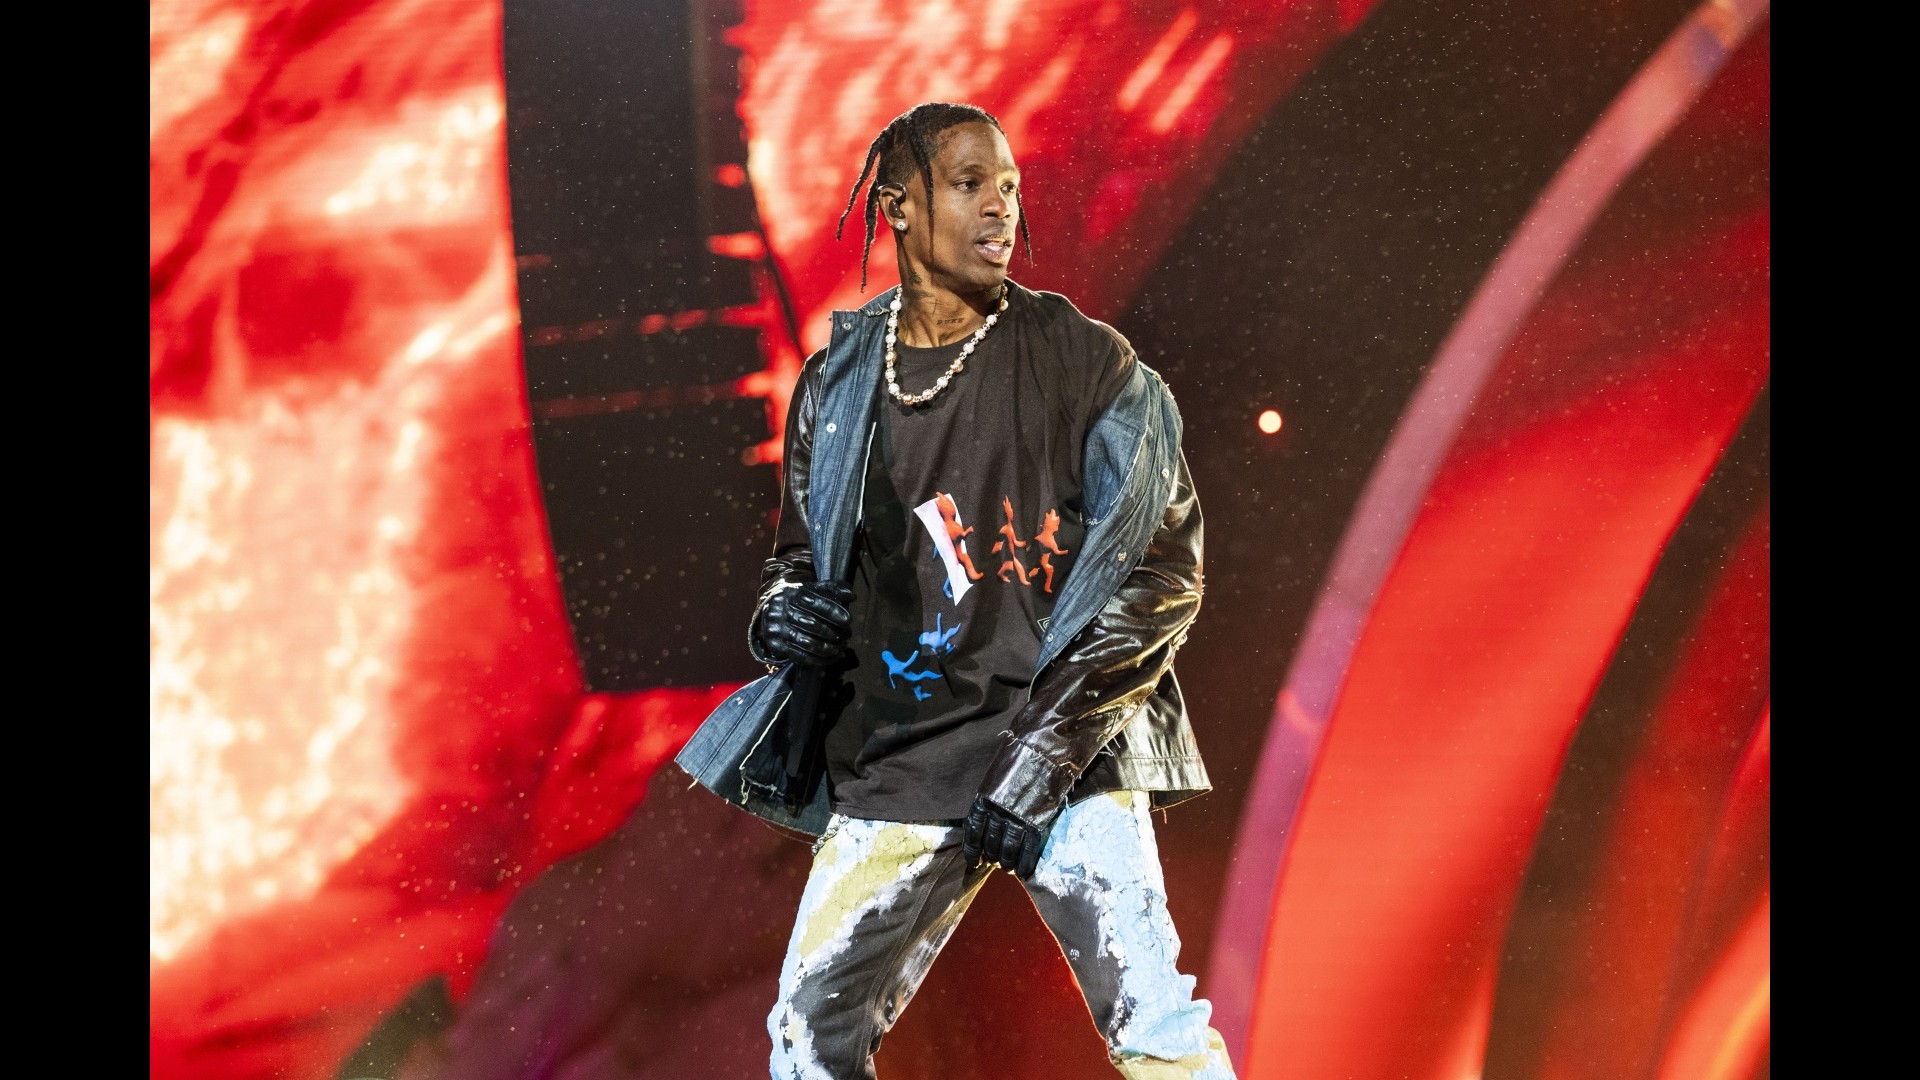 Travis Scott's Astroworld Festival Sells Out in Under an Hour